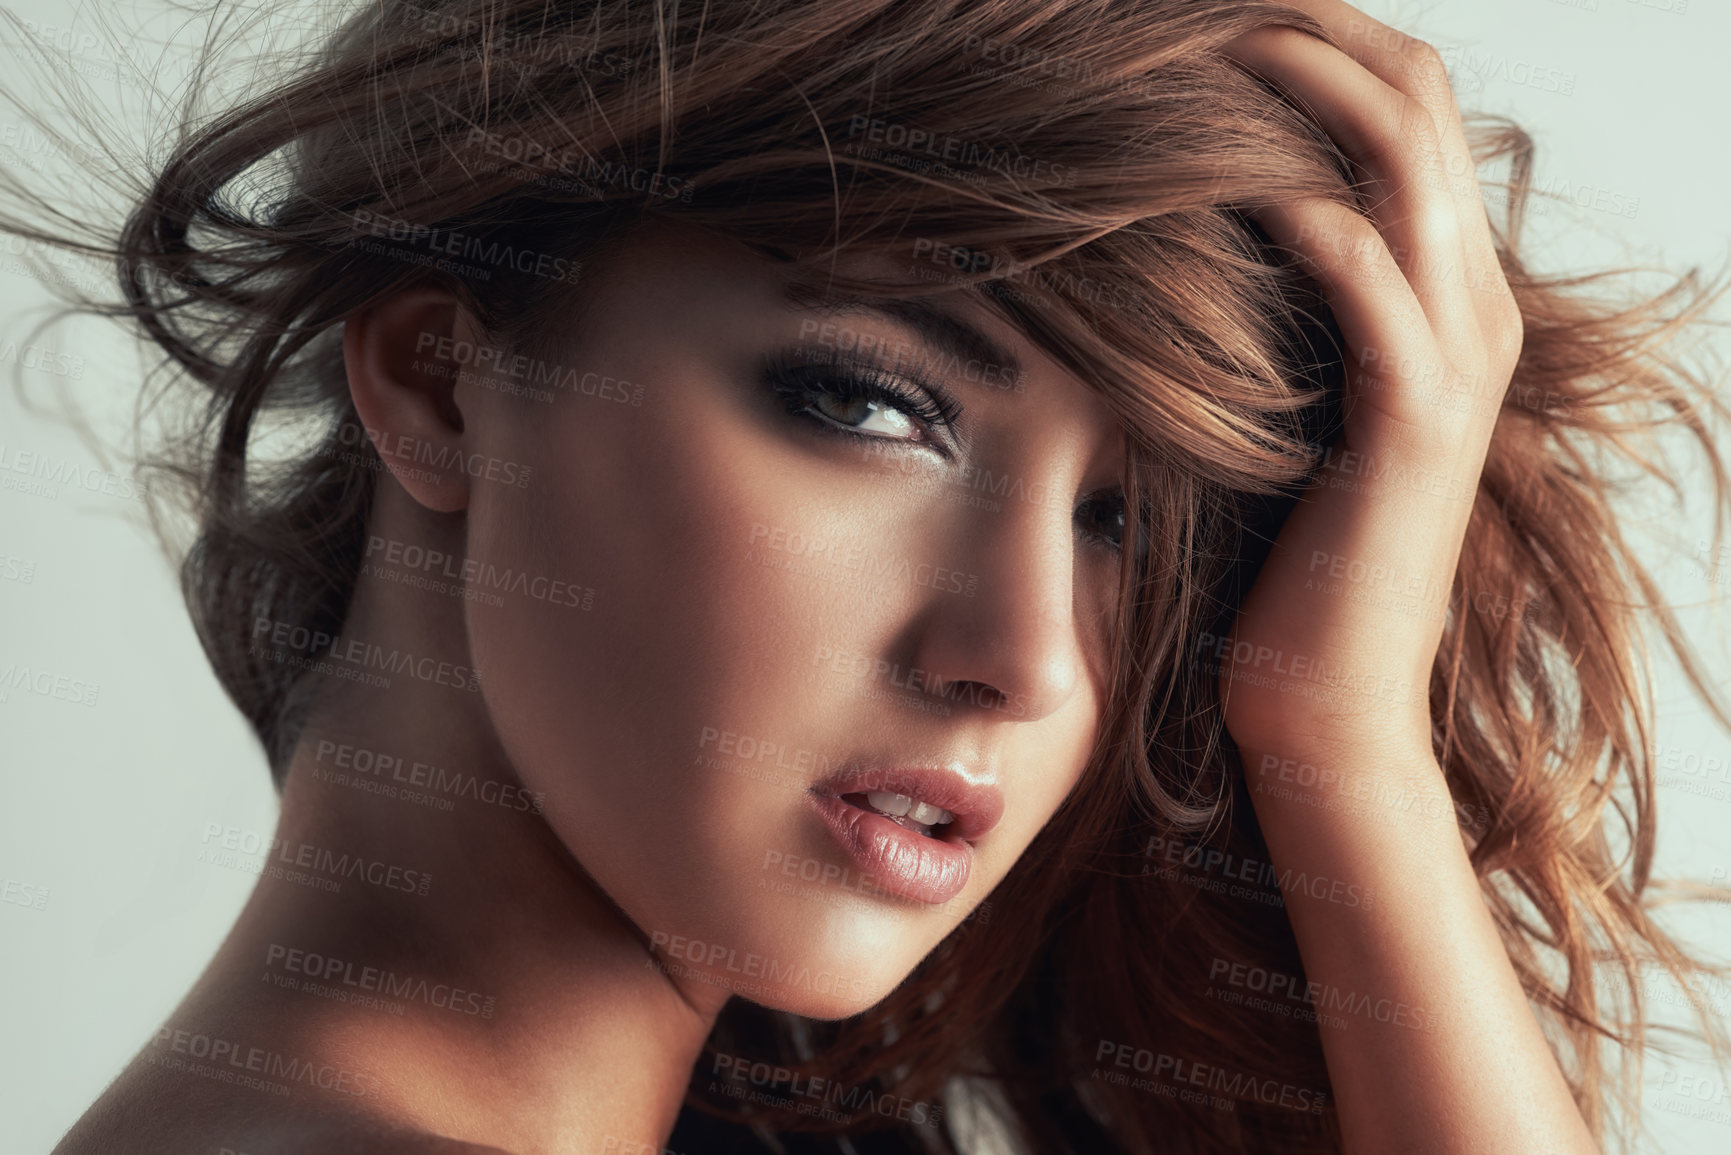 Buy stock photo Studio portrait of a gorgeous young woman posing against a grey background